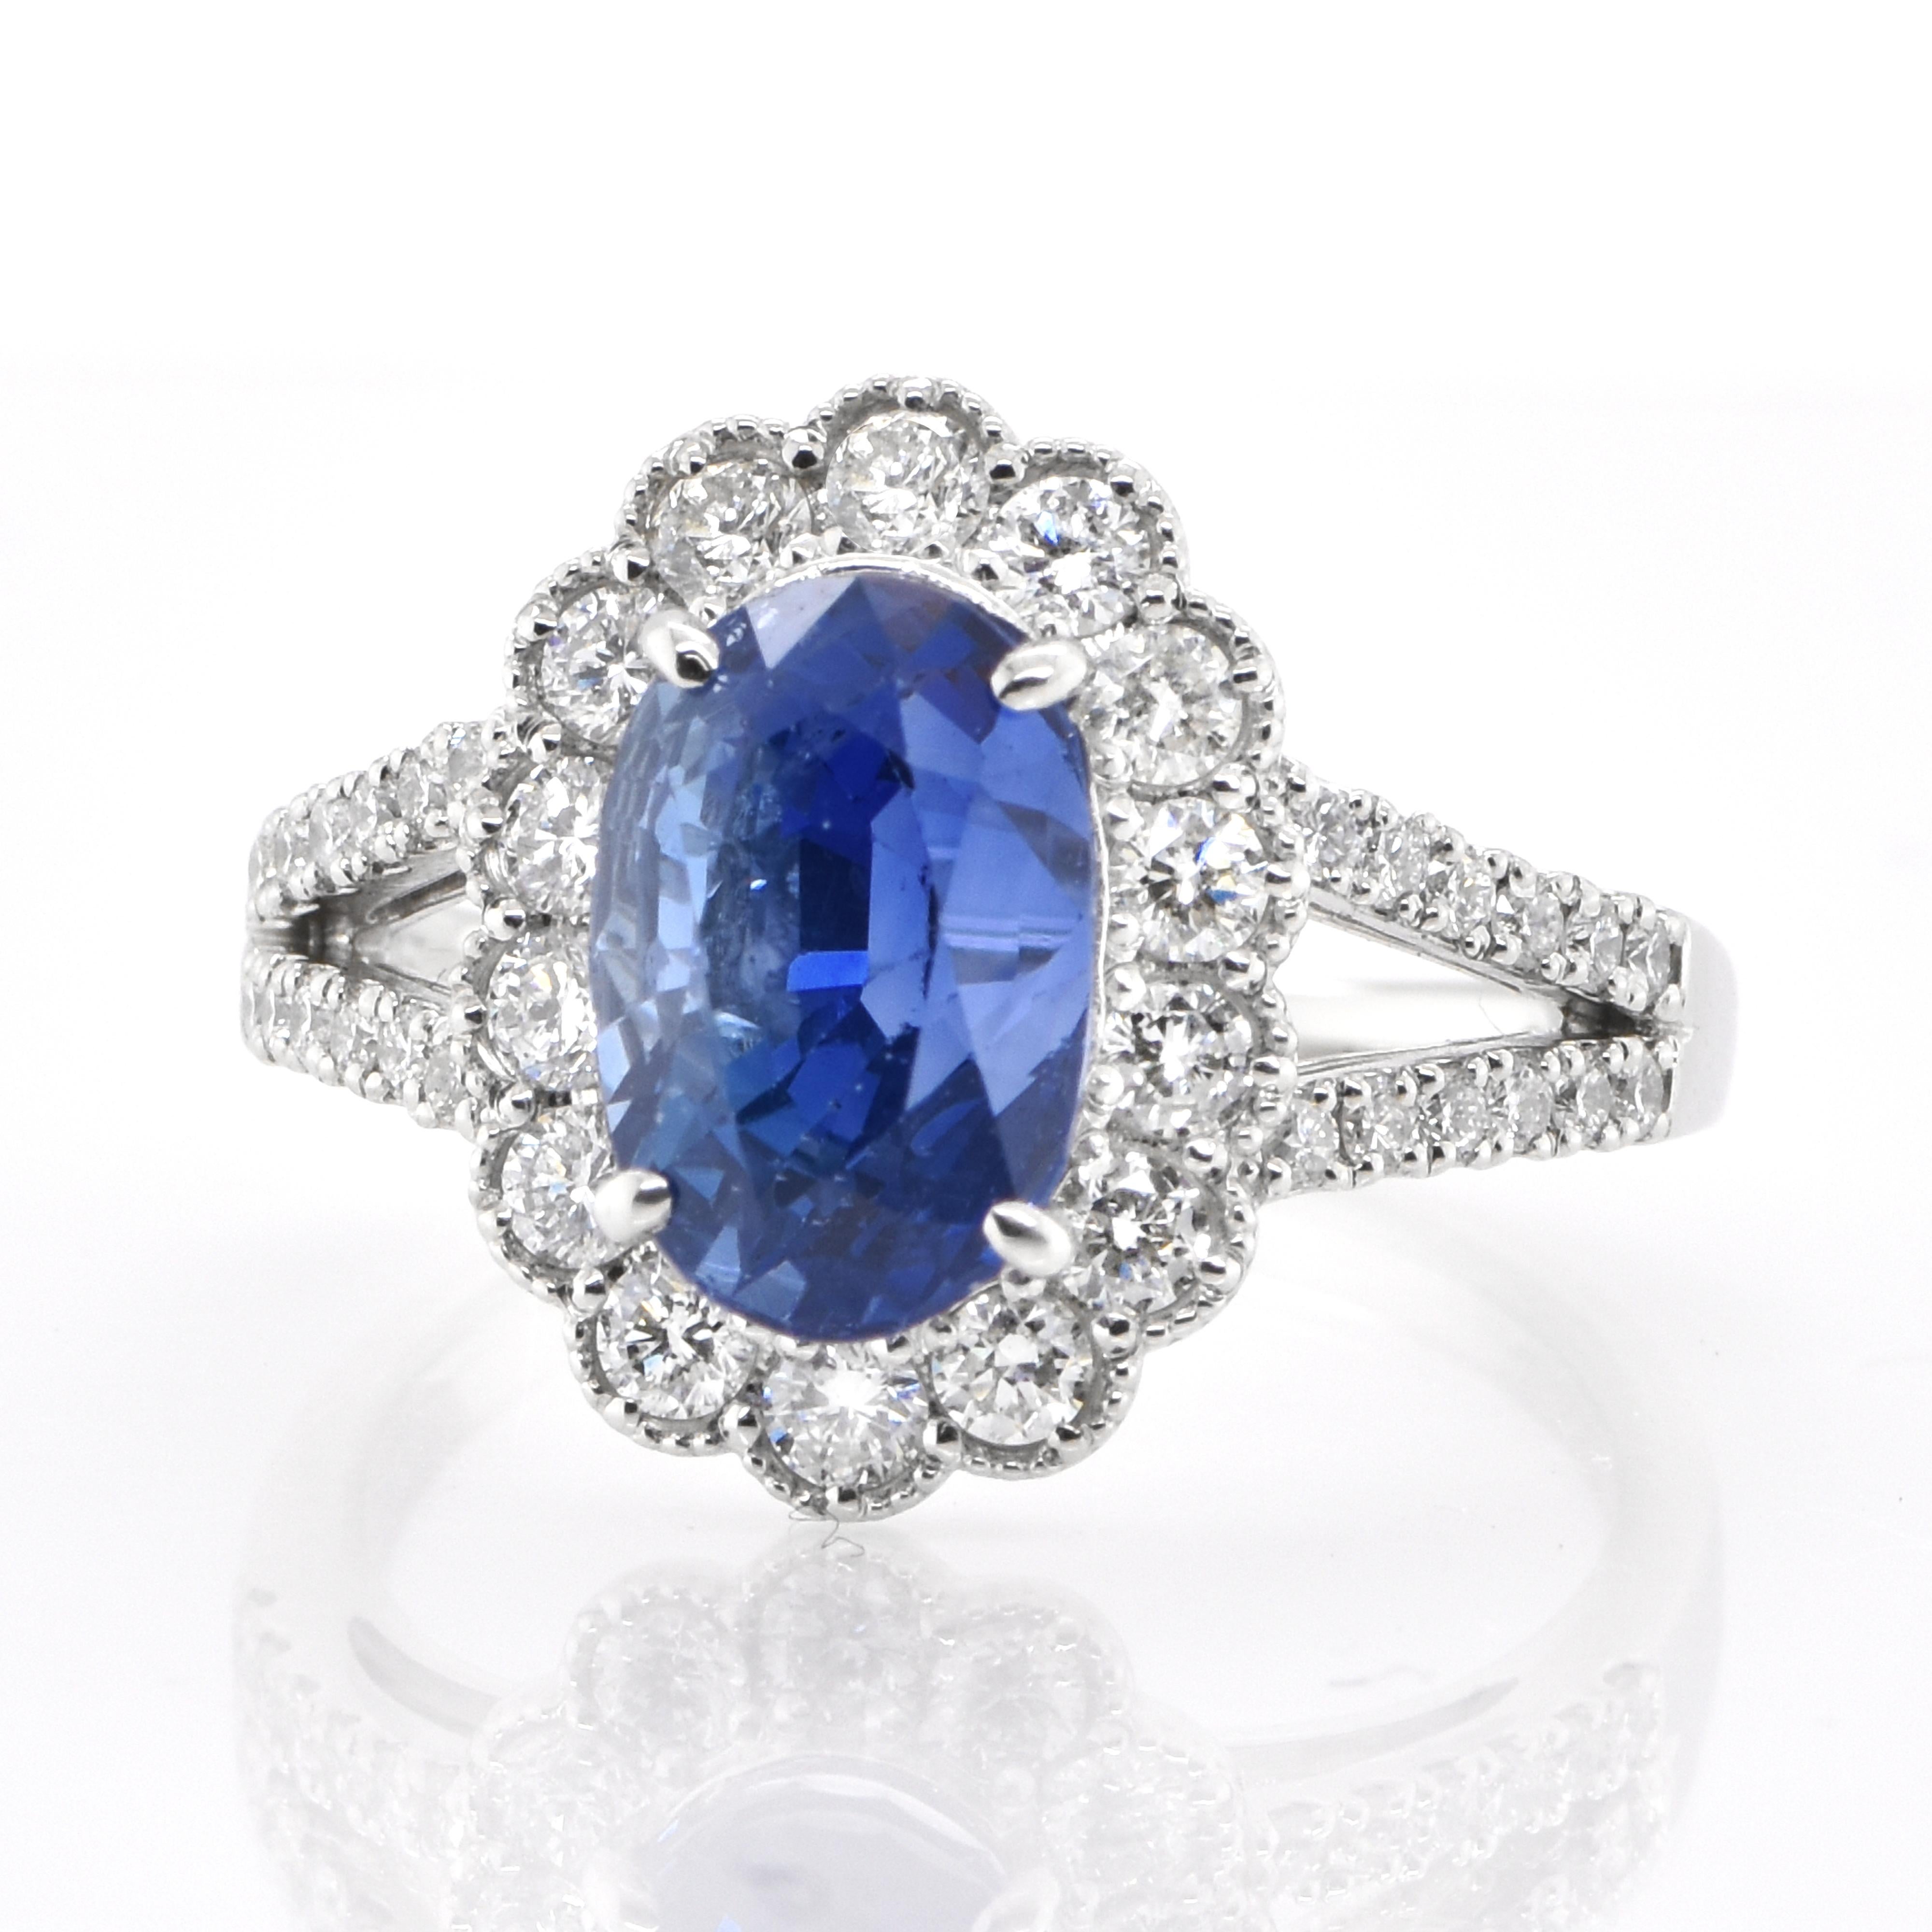 A beautiful ring featuring GIA Certified 3.79 Carat, Natural, Ceylon (Sri Lankan) Sapphire and 0.73 Carats Diamond Accents set in Platinum Sapphires have extraordinary durability - they excel in hardness as well as toughness and durability making